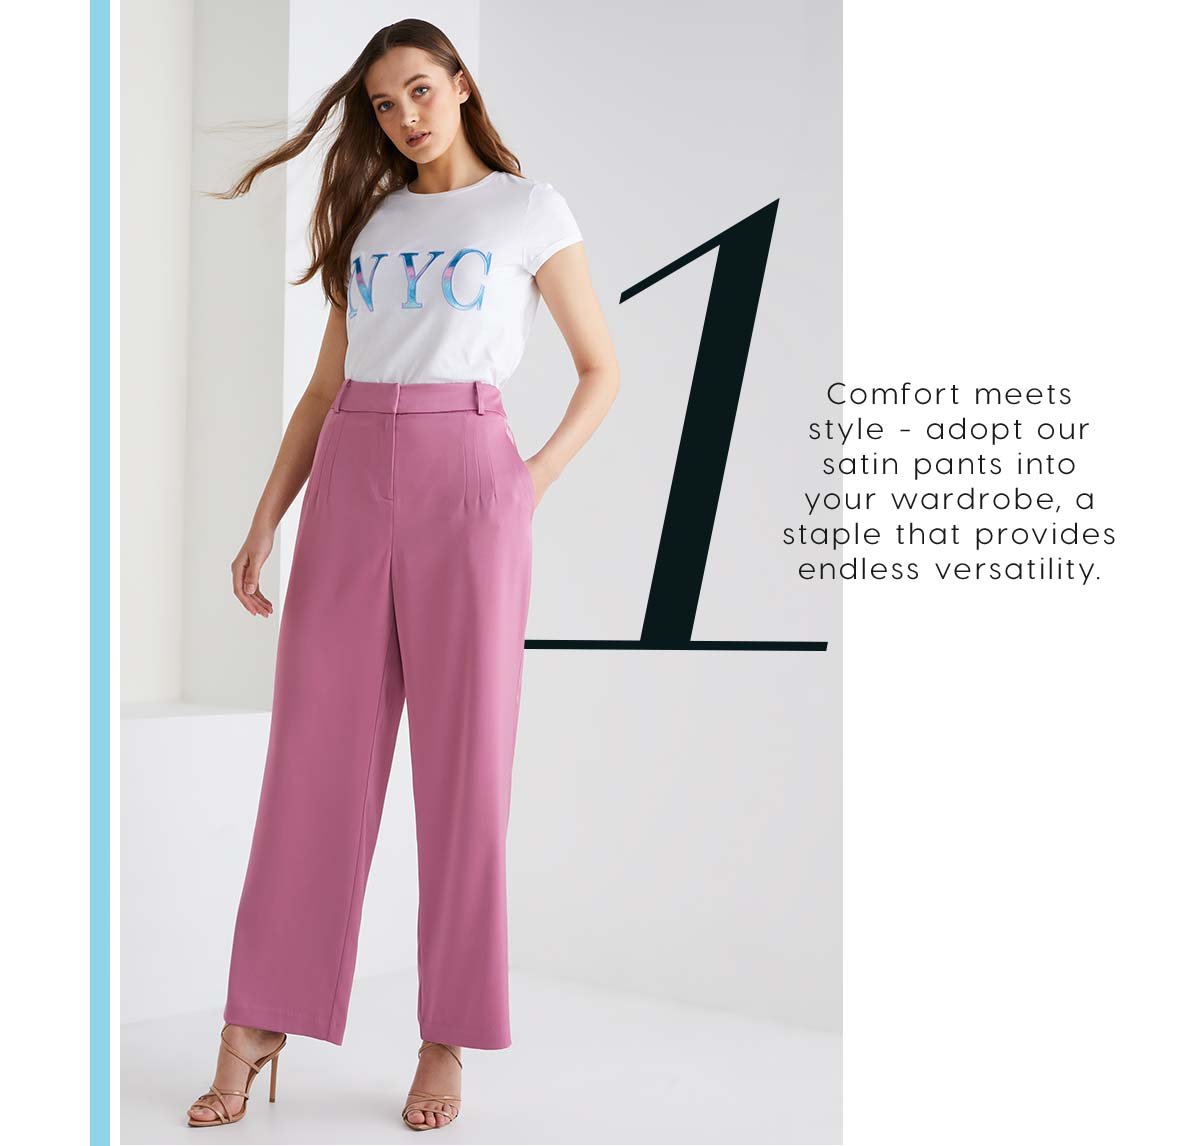 1. Comfort meets style - adopt our satin pants into your wardrobe, a staple that provides endless versatility. 